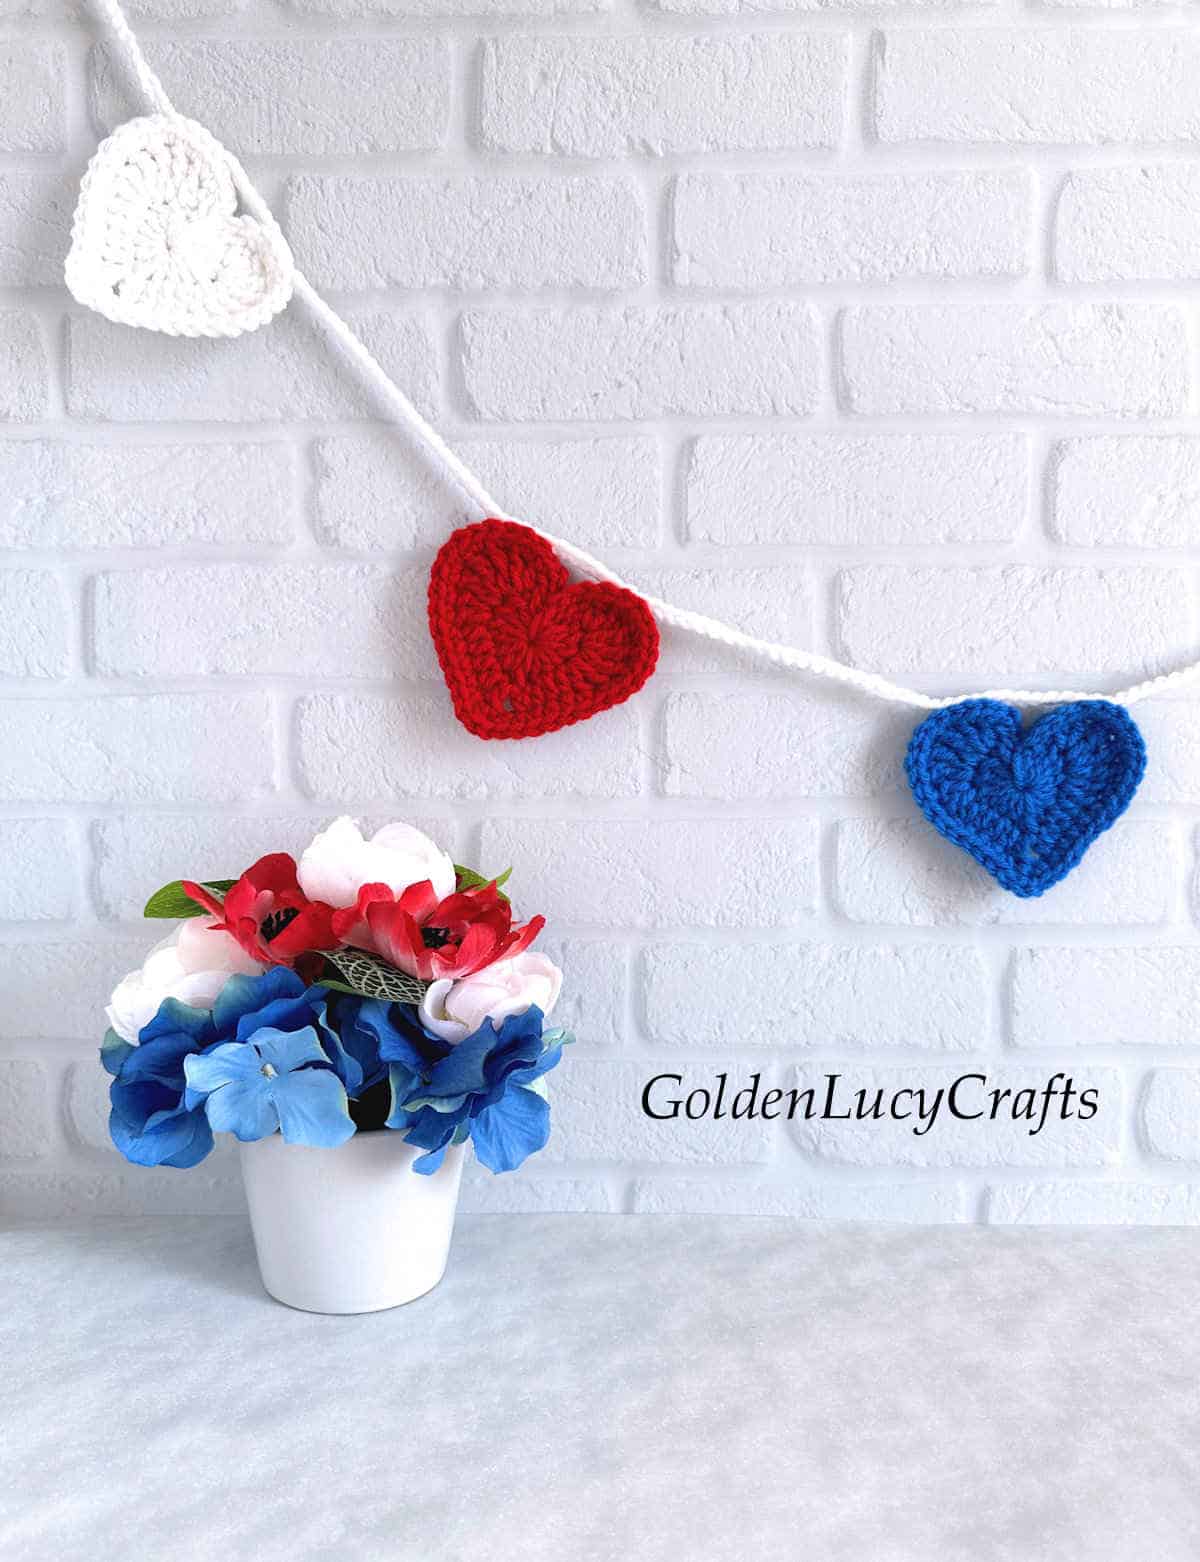 Crochet patriotic heart garland hanging on the wall.